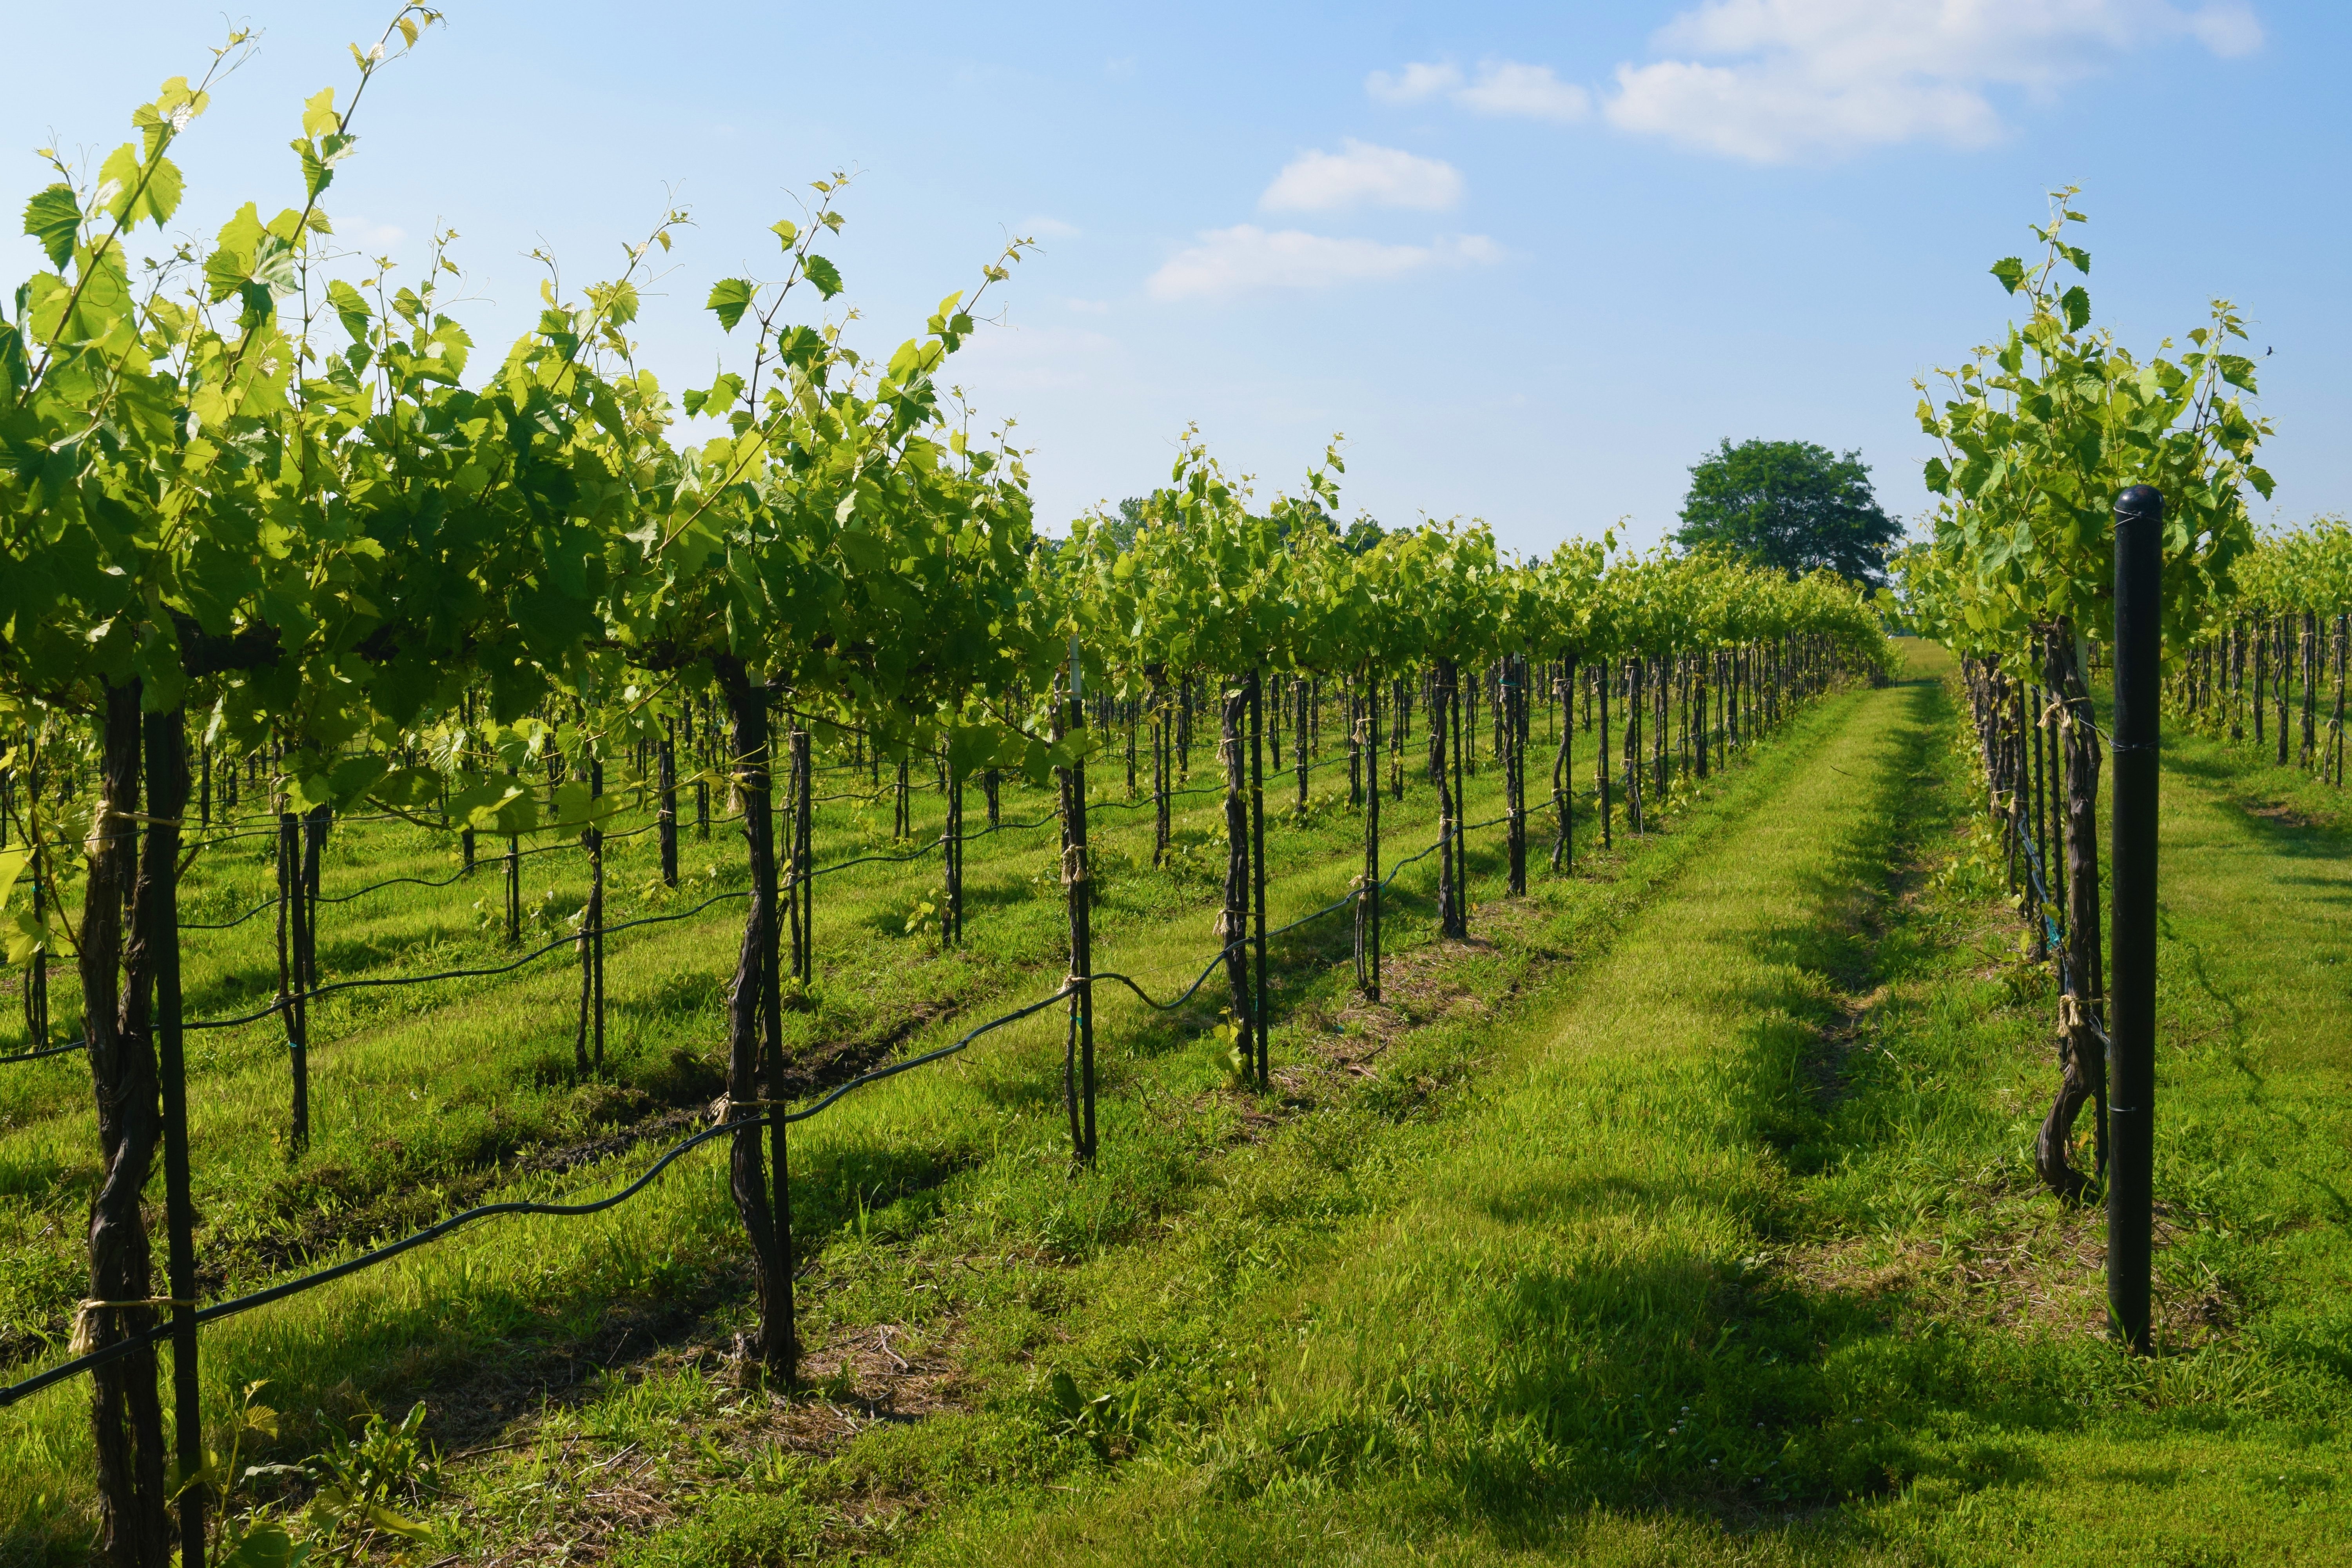 Early spring view of wine grape vine rows in a vineyard with lush green grass and a small canopy